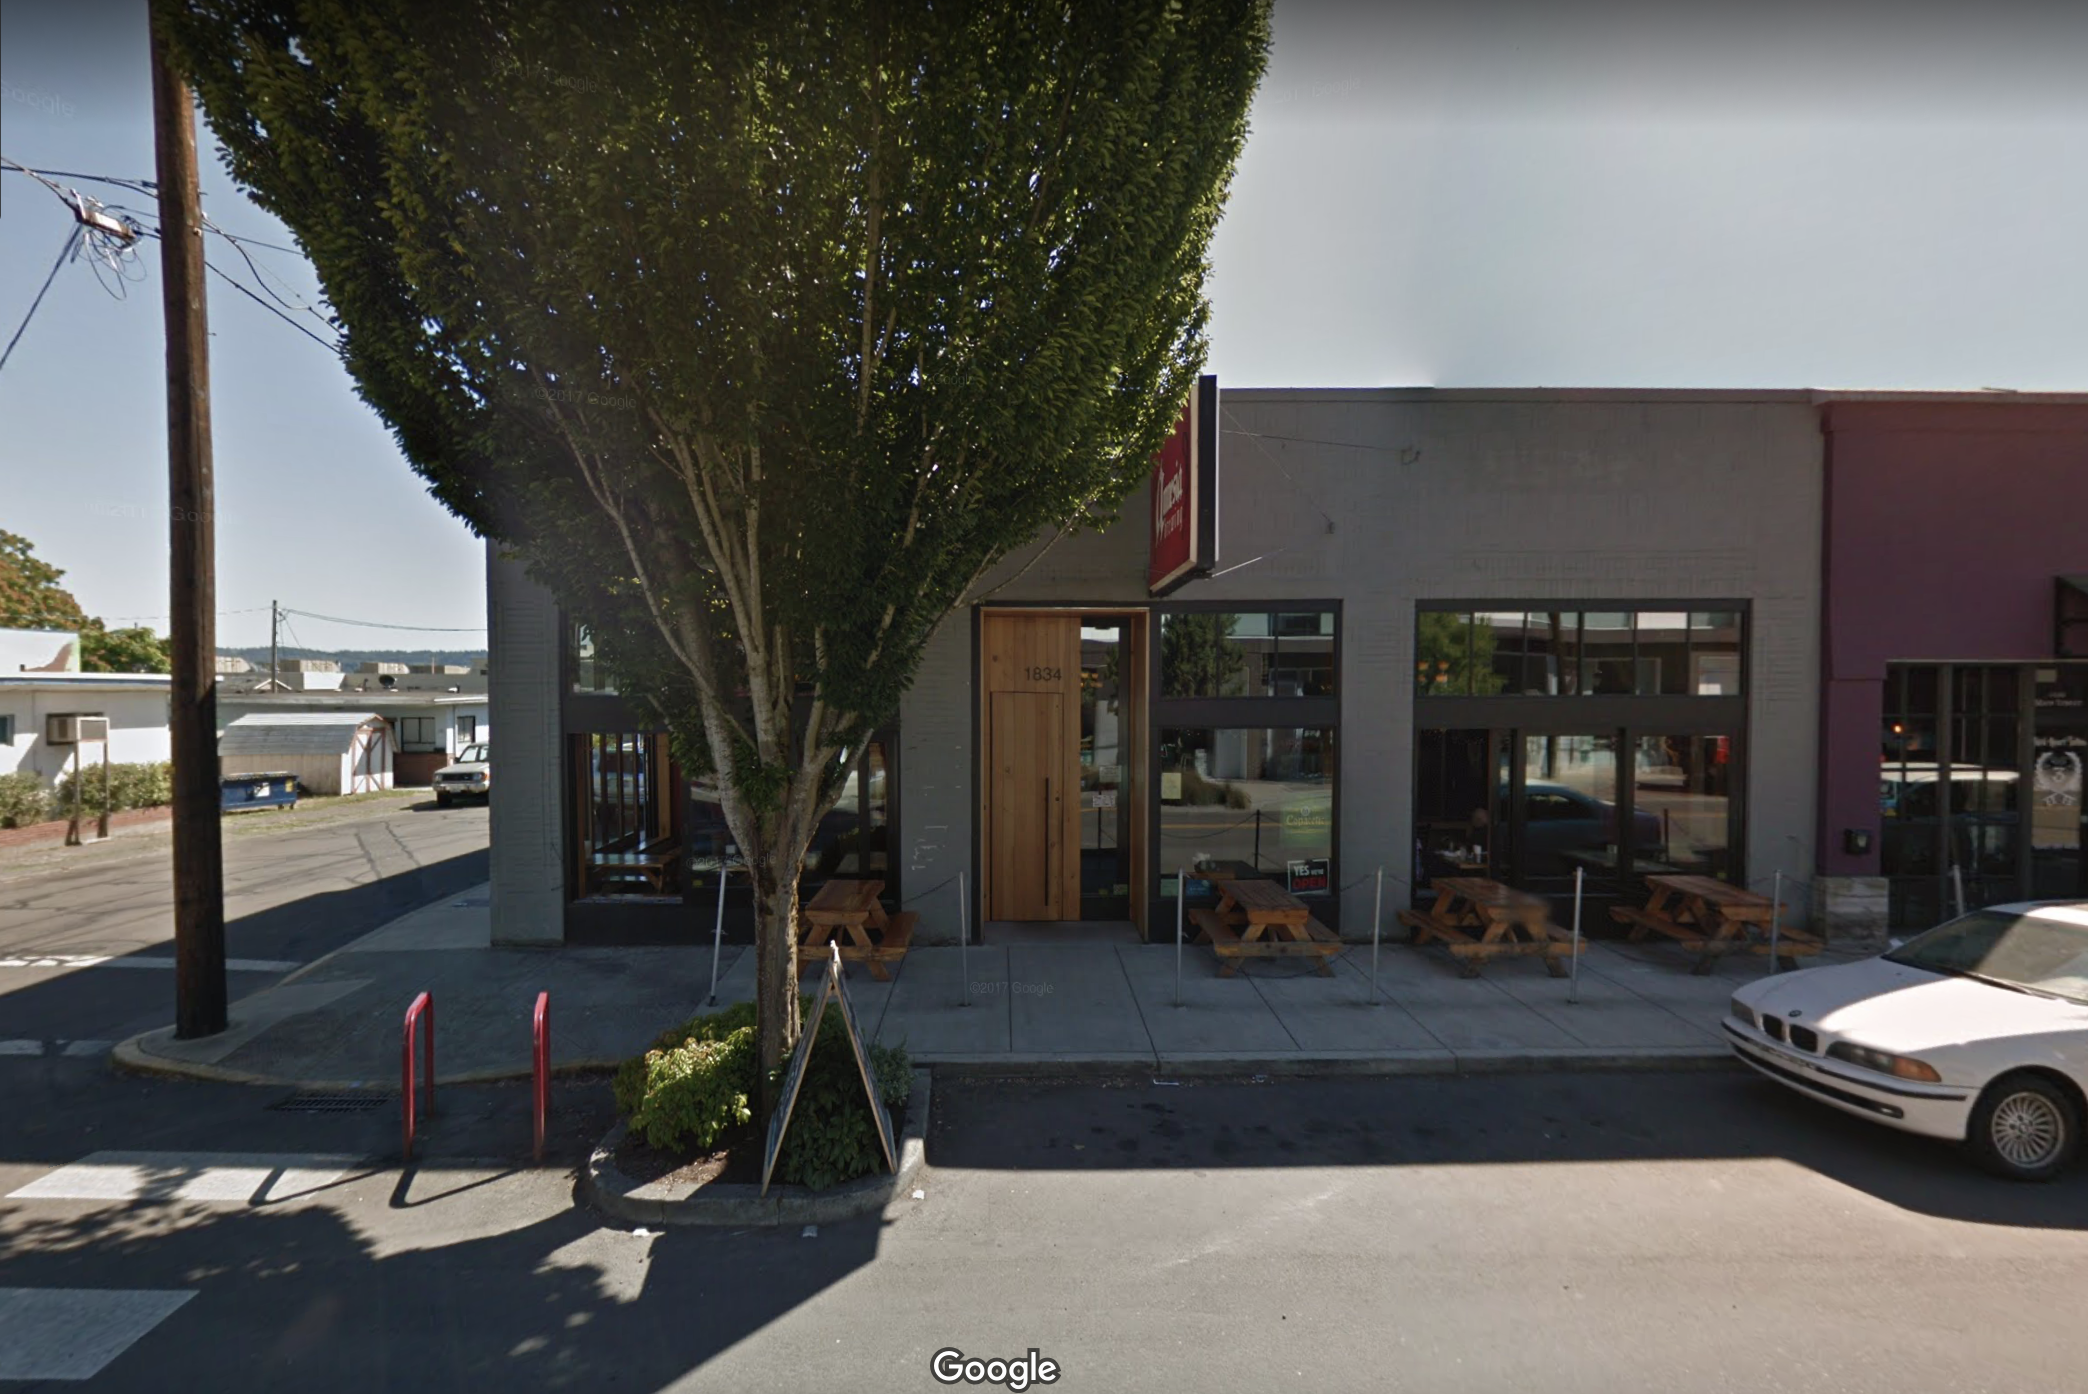 Trap Door Brewing's forthcoming location, The Gateway, located at 1834 Main Street in Washougal, Washington.